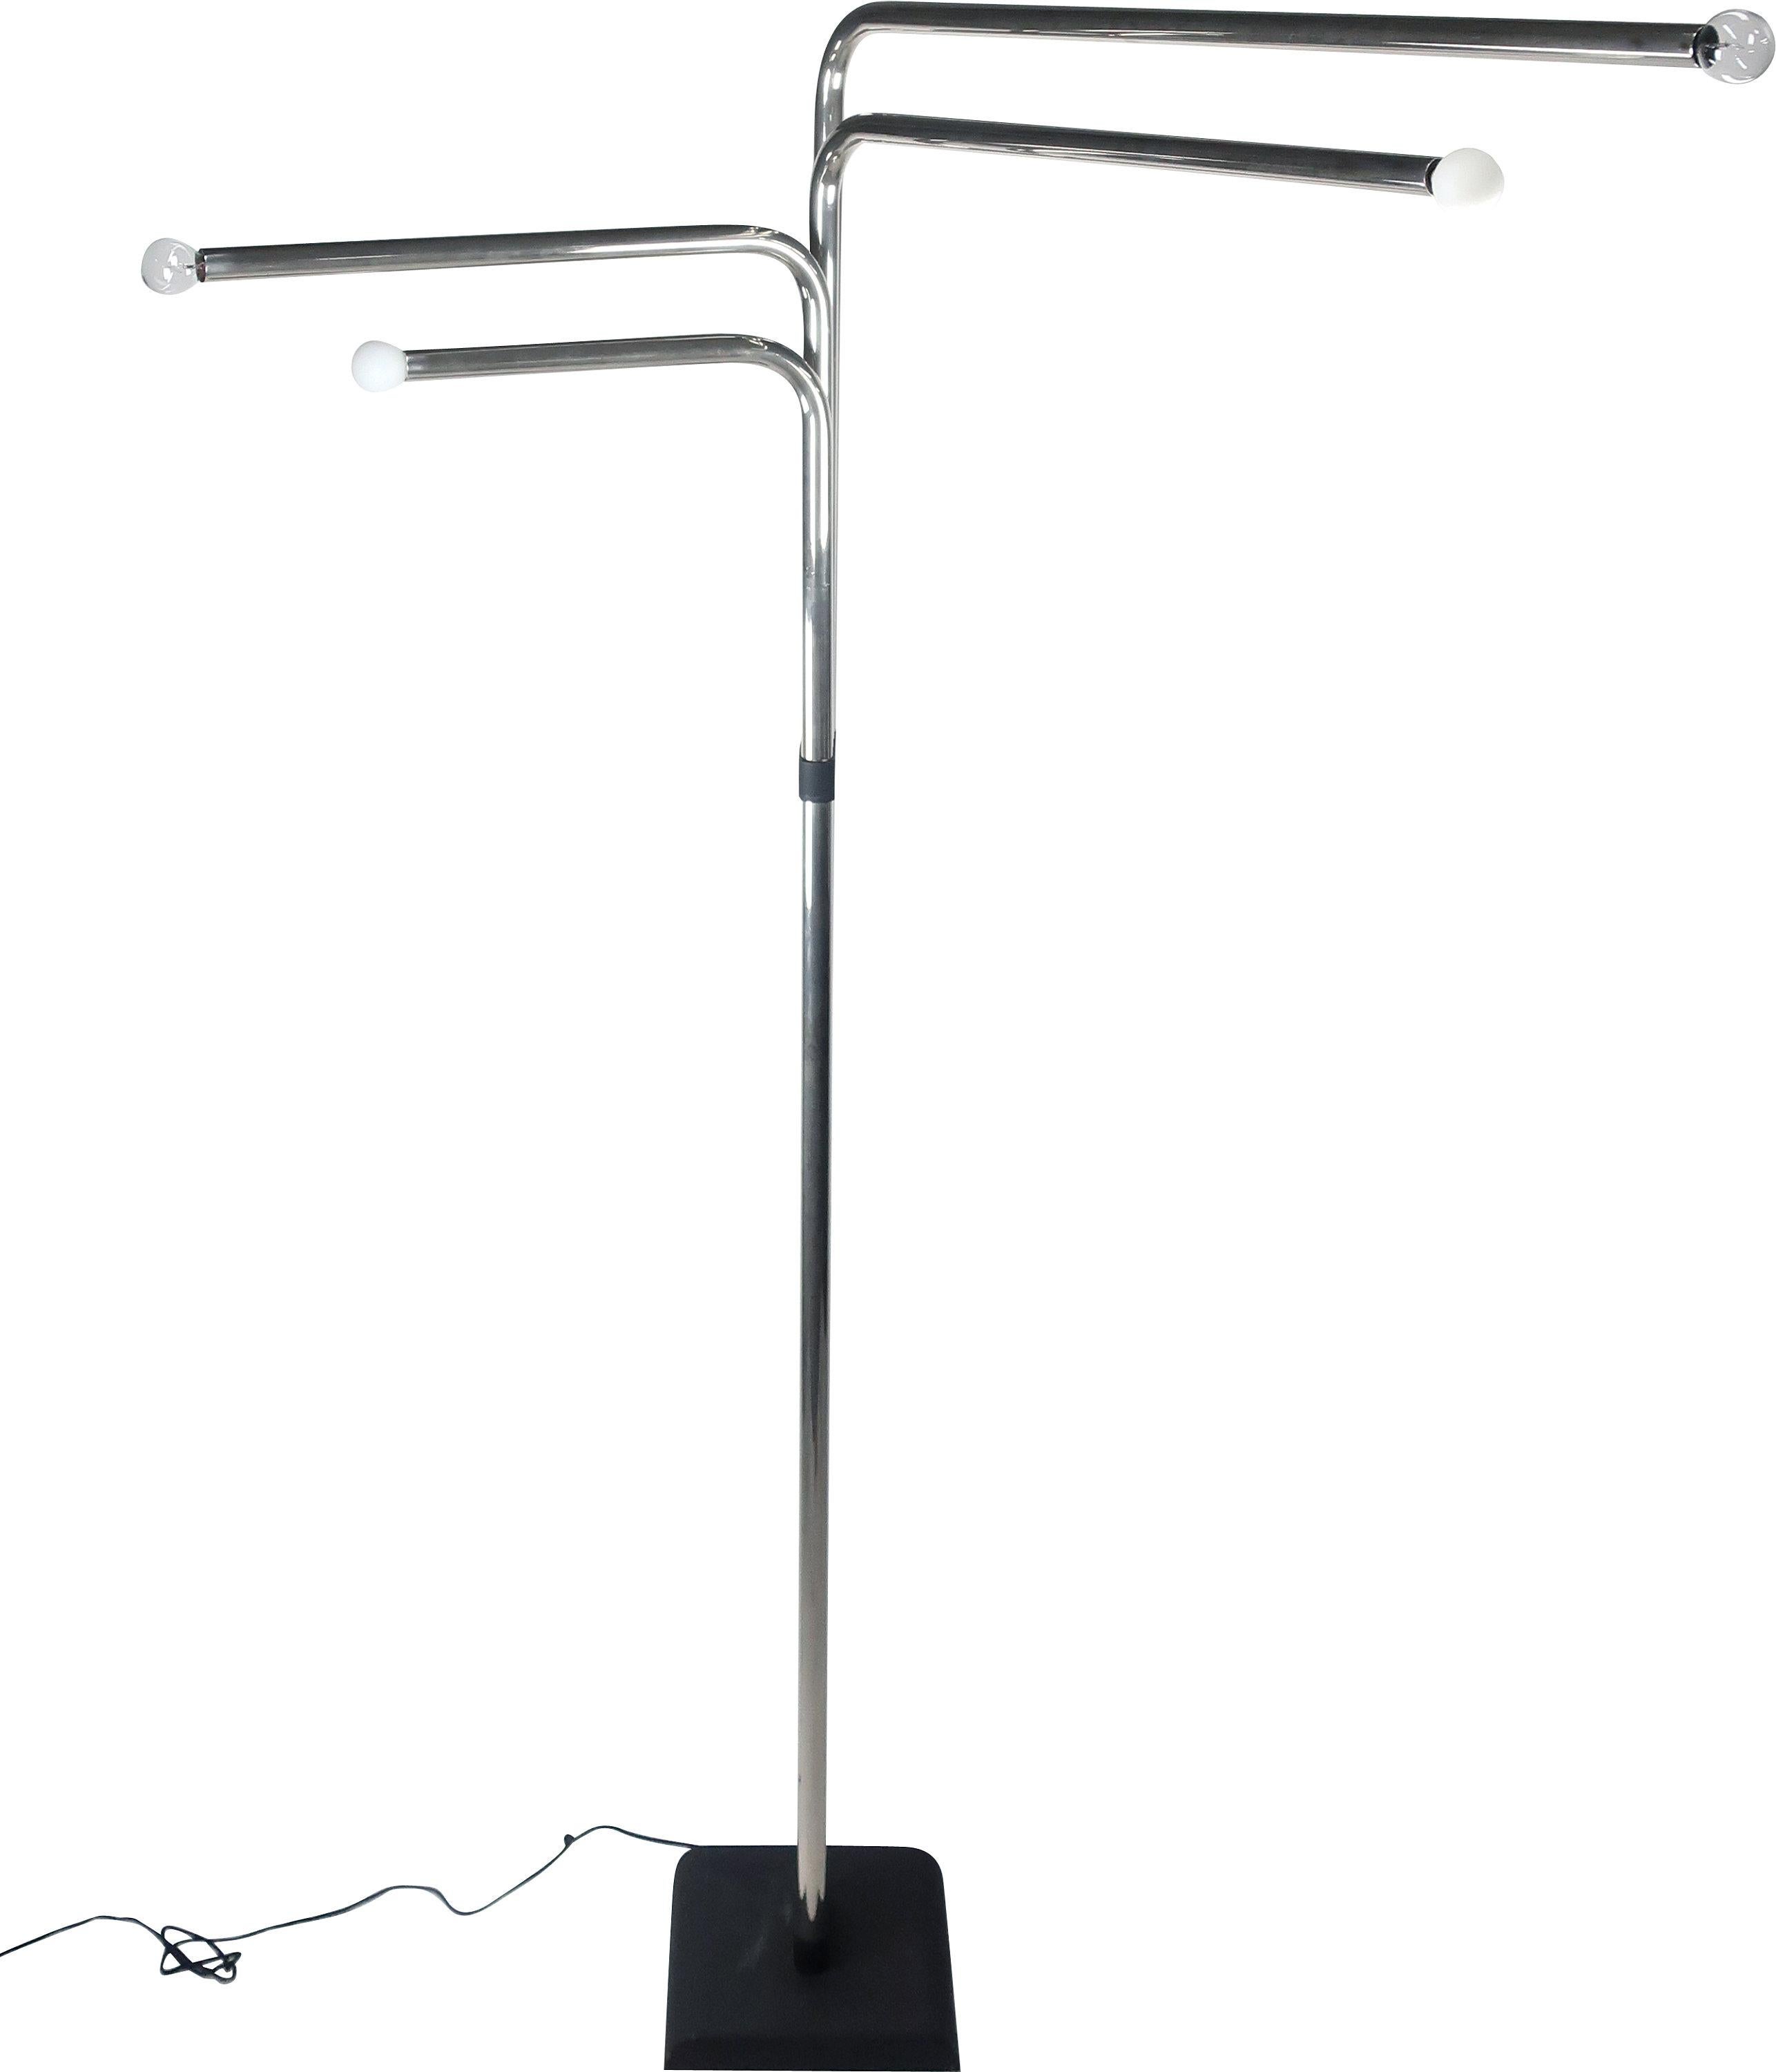 A stunning sculptural floor lamp by Goffredo Reggiani with four articulated chrome arms standing 6.75 feet tall (81 inches). Each of the four chrome tubes is bent at 90 degrees and can be rotated individually, and each tube has a bulb at the end of